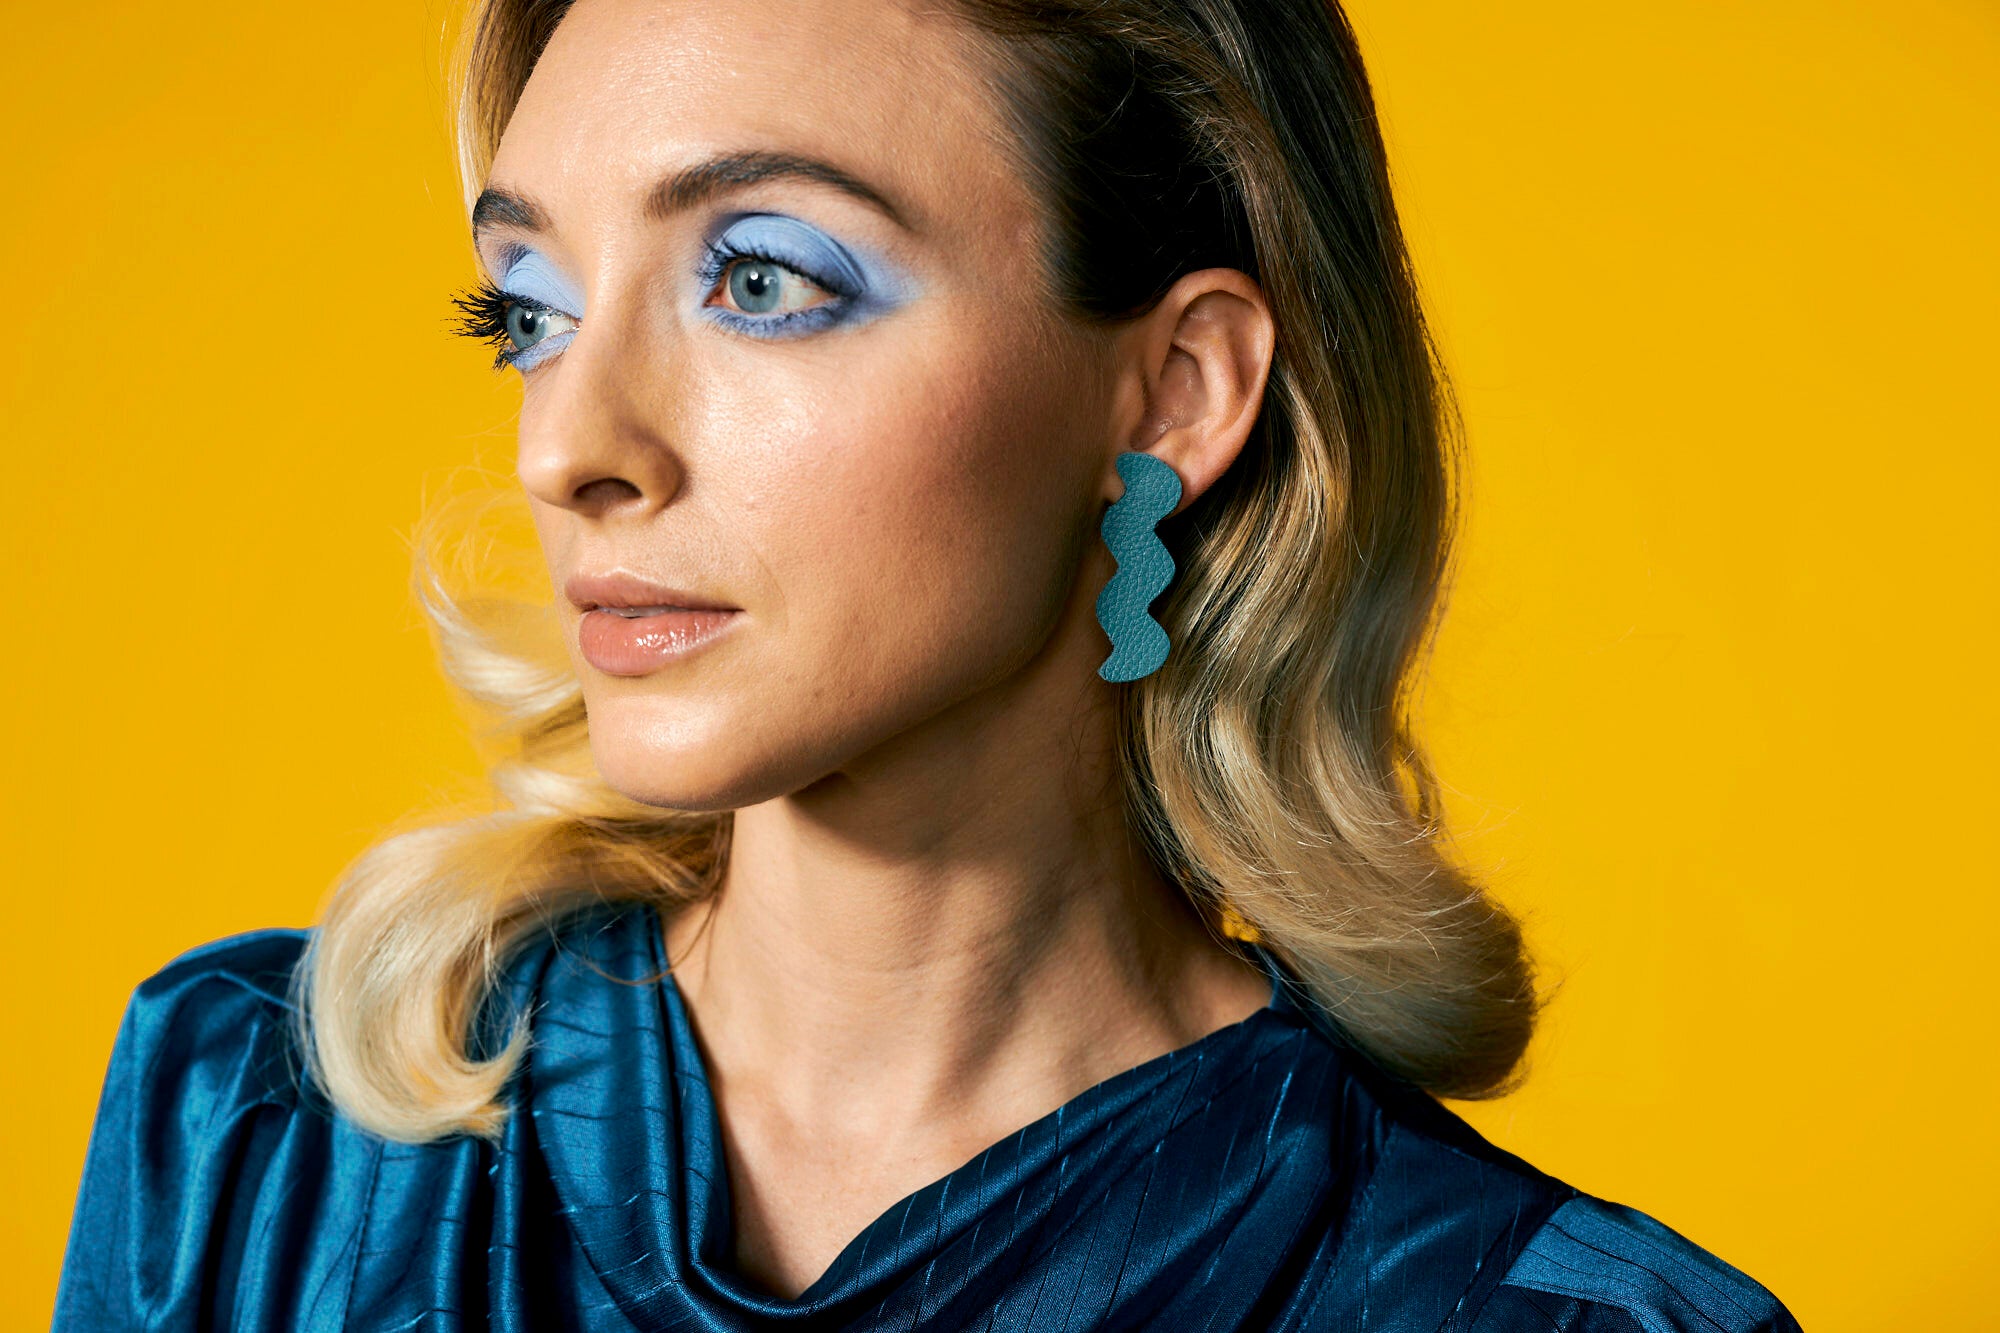 A woman dressed in turquoise styles the leather light trace earring in teal against a bold yellow background.